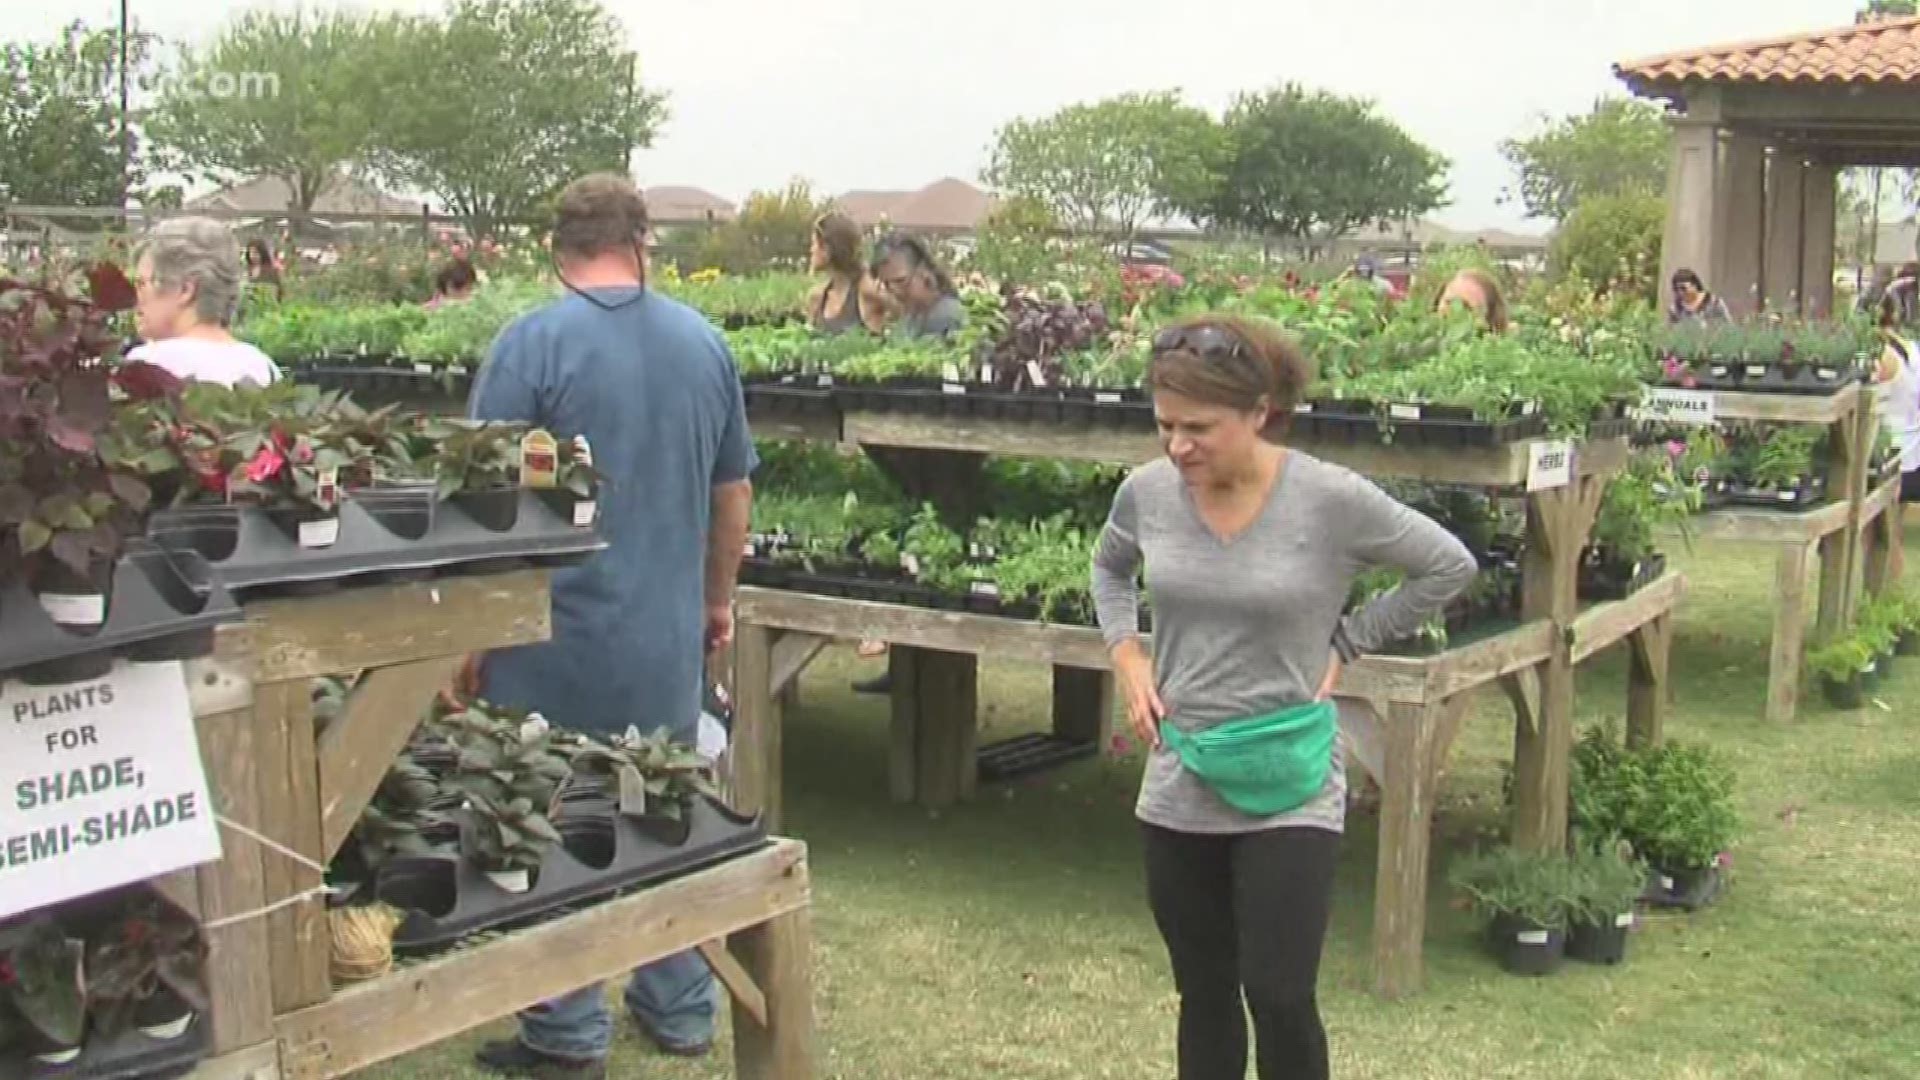 This is the non-profit's annual mega plant sale and garden festival that only costs $1. The event is from  9 a.m. to 5 p.m., Saturday, April 6, 2019.